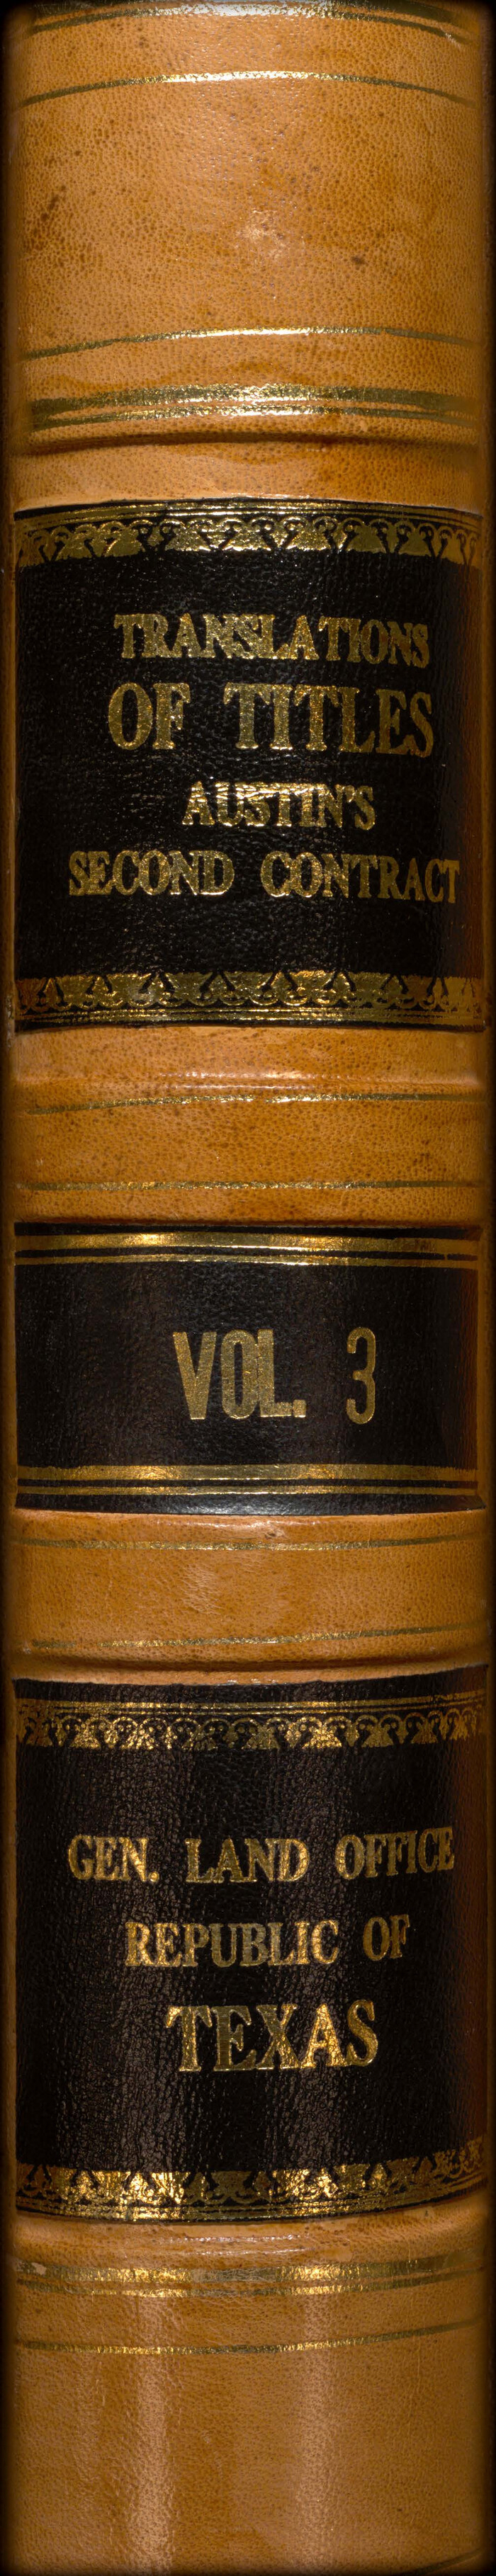 94548, Translations of Titles - Austin's Second Contract, Vol. 3, Historical Volumes